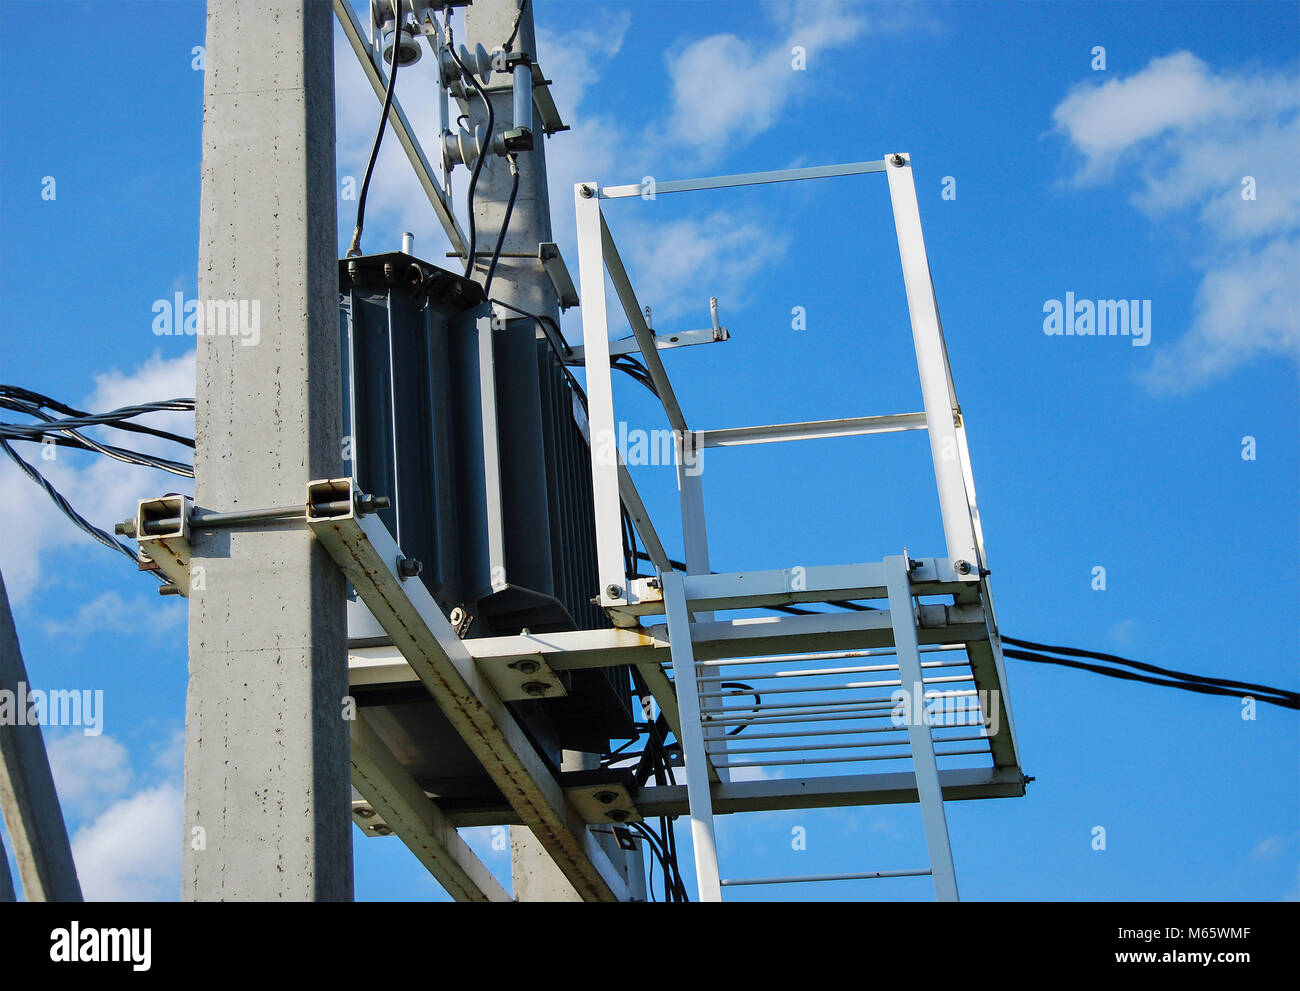 An electrical distribution transformer with cooling fins is located on the pole. Against the blue sky. Side view Stock Photo